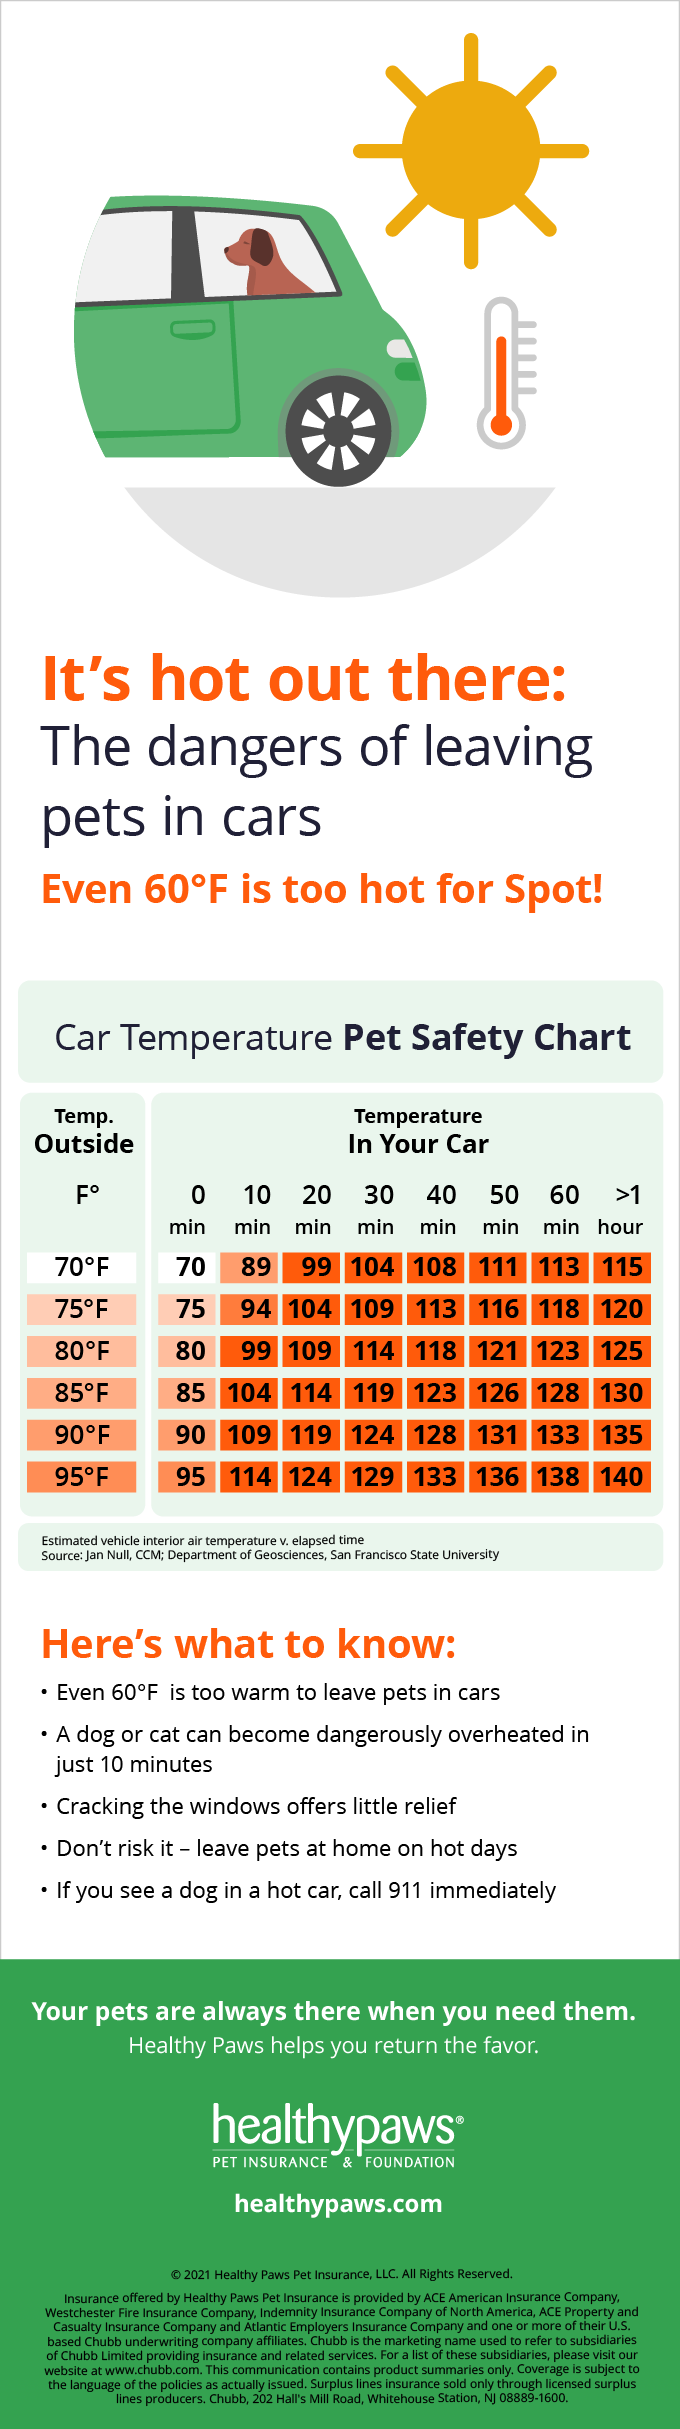 Infographic showing dangerous temperatures for pets in cars.